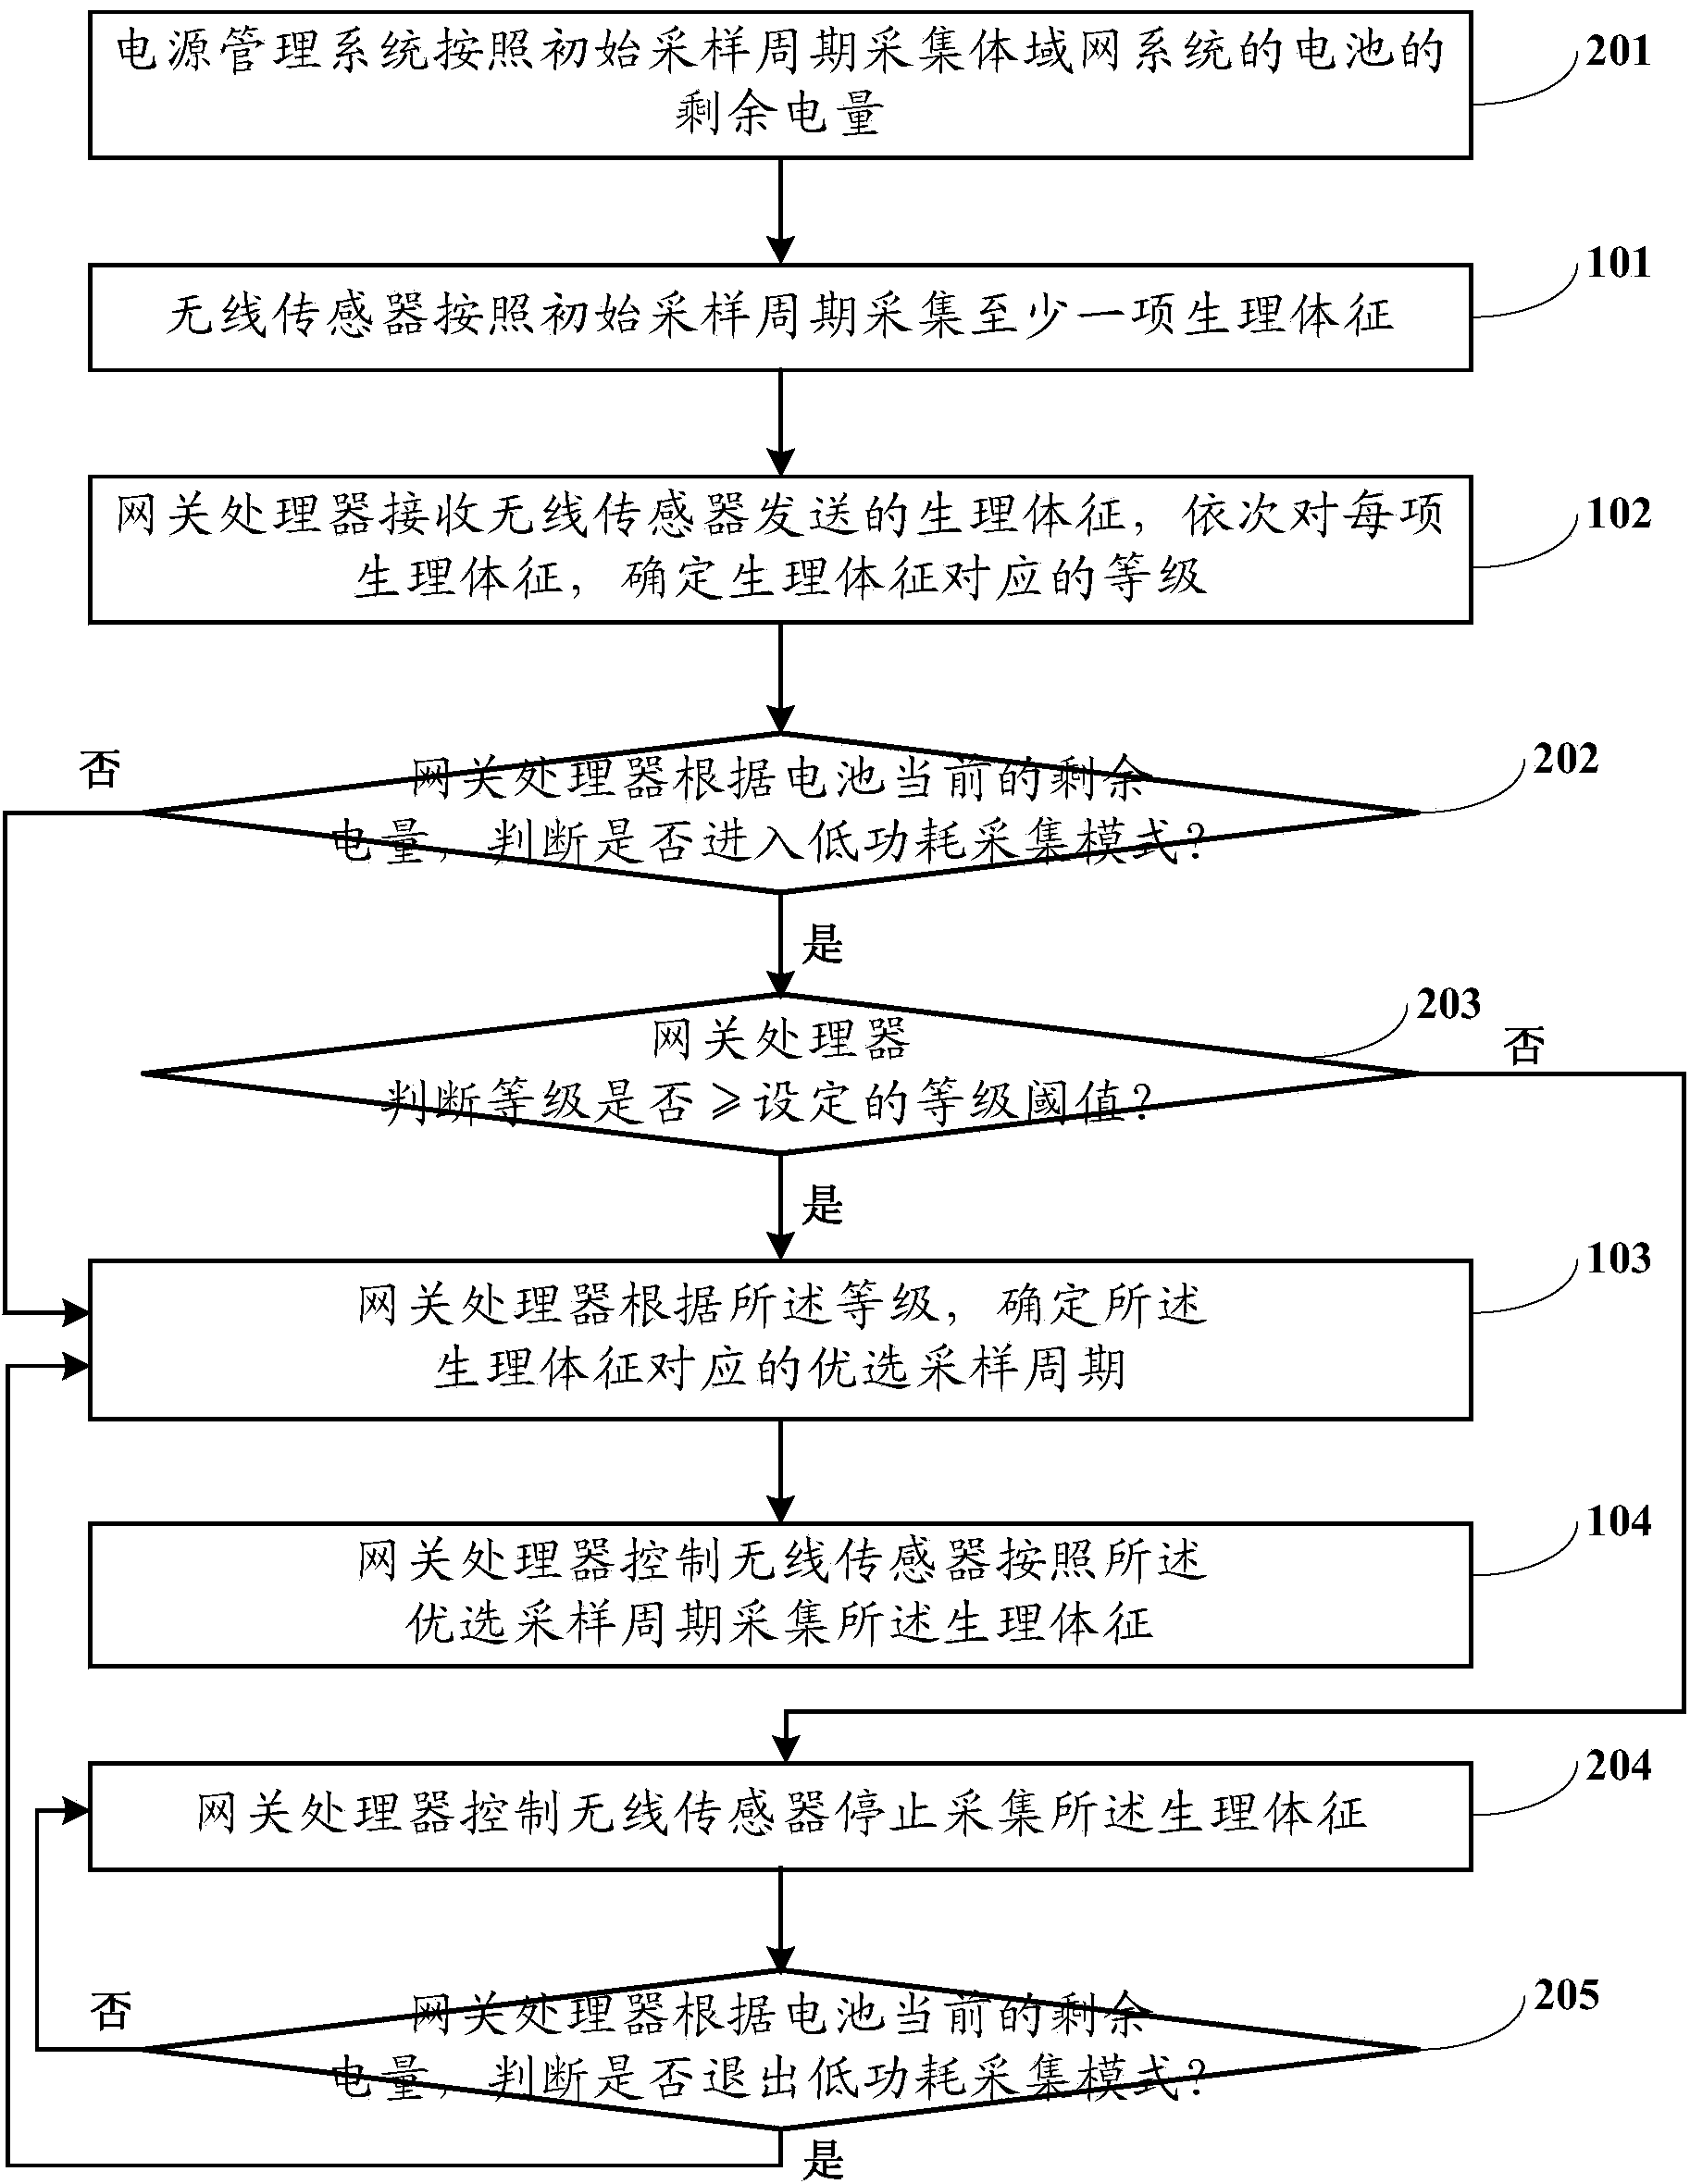 Information collecting system and method of body area network system